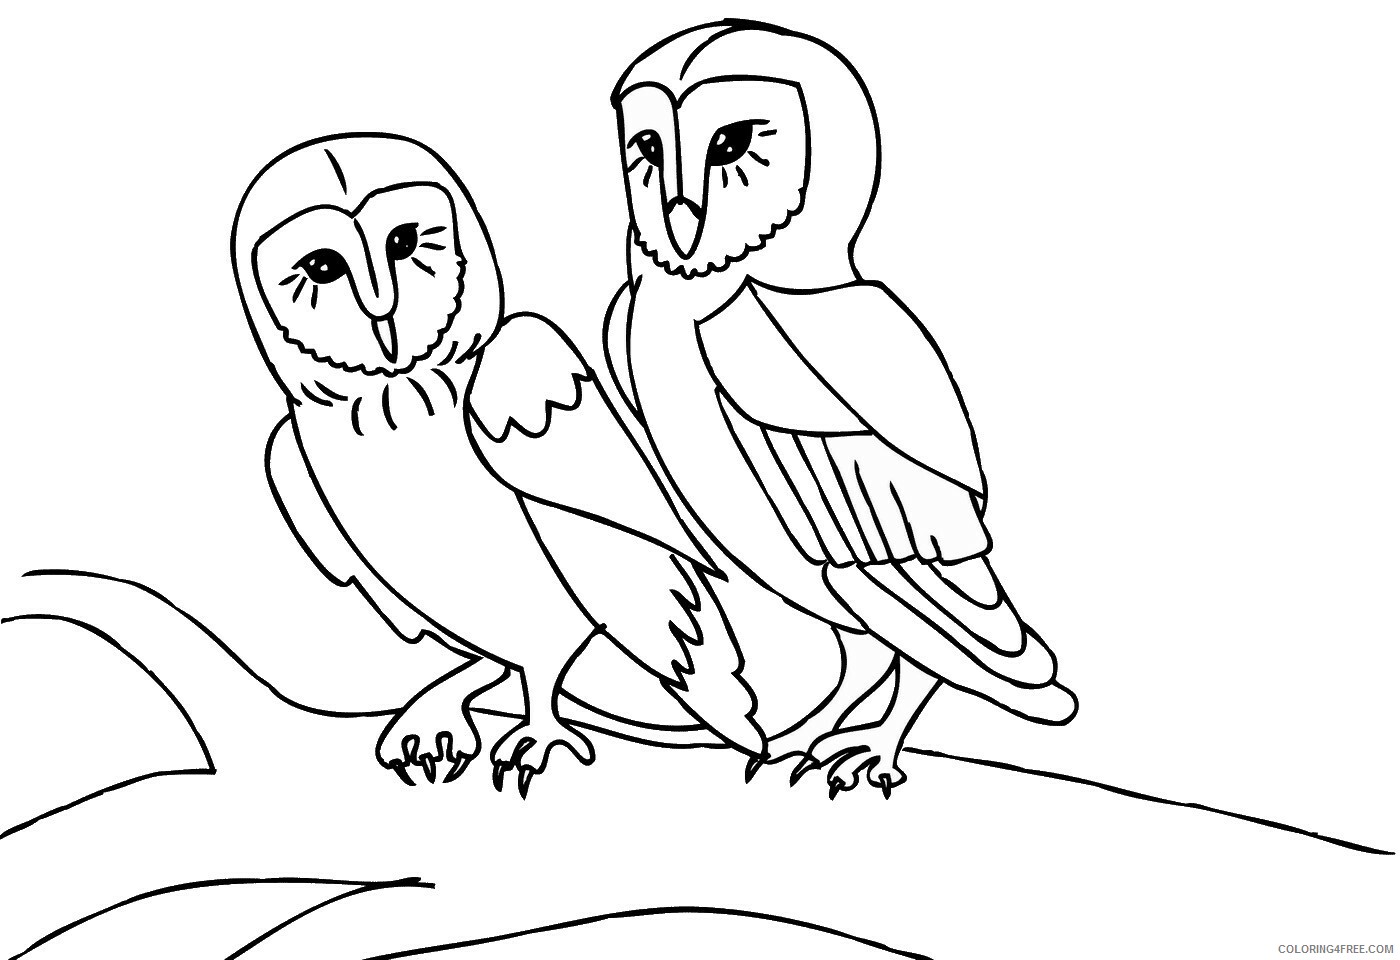 Owl Coloring Pages Animal Printable Sheets Owl_cl_08 2021 3637 Coloring4free